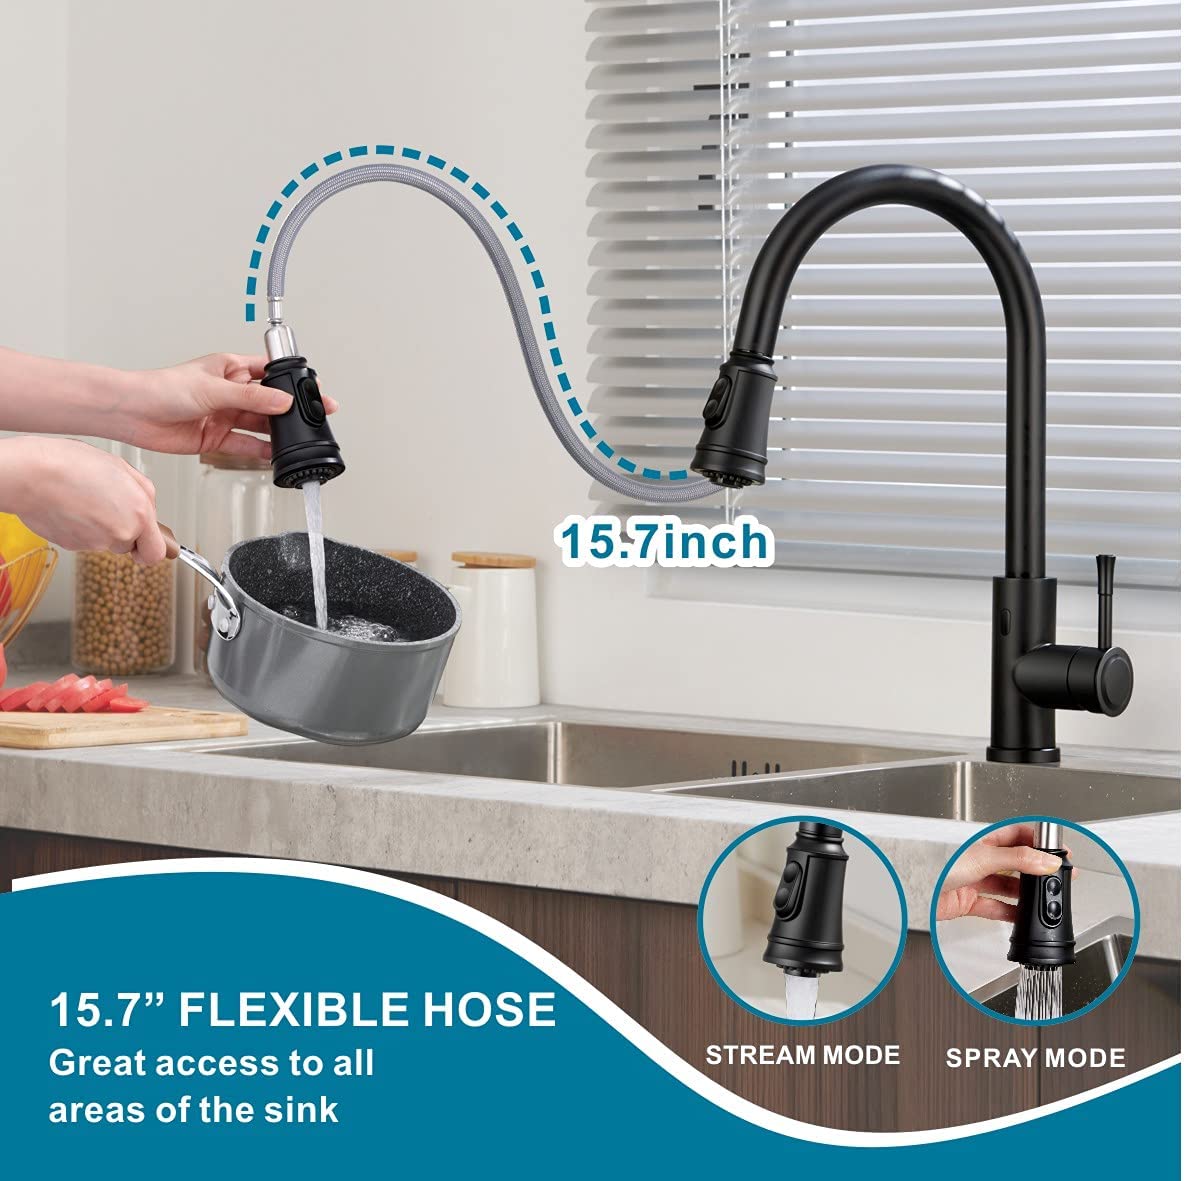 Welsan Touchless Kitchen Faucet, Hands-Free Automatic Smart Faucet with Pull Down Sprayer, Stainless Steel Matte Black, Single Handle Motion Sensor Activated Faucet for Kitchen Sink